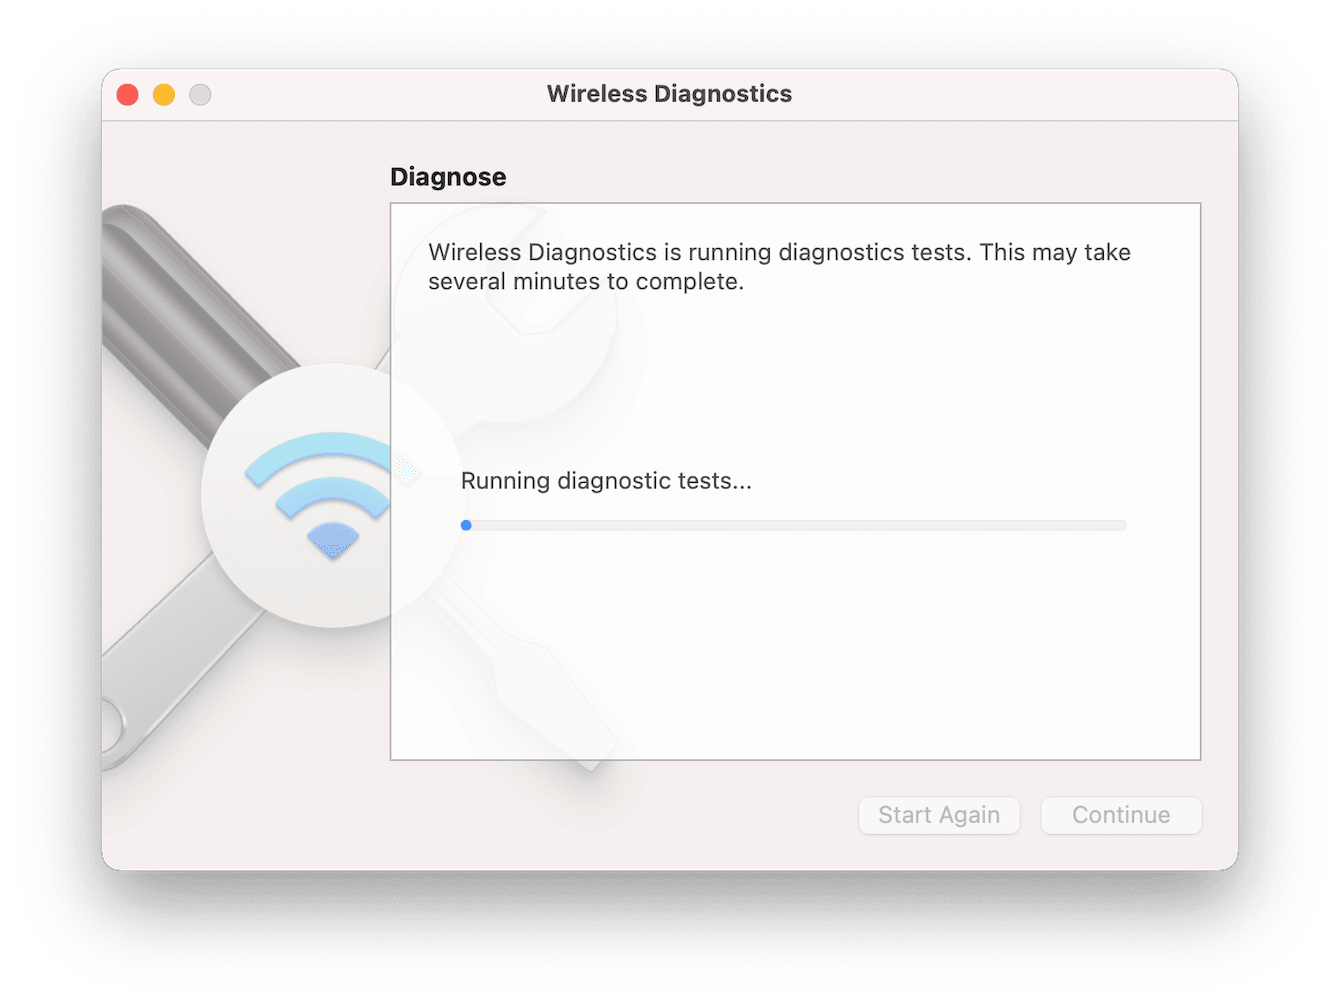 You can use The Wireless Diagnostics tool to generate a report and analysis of Wi-Fi connection